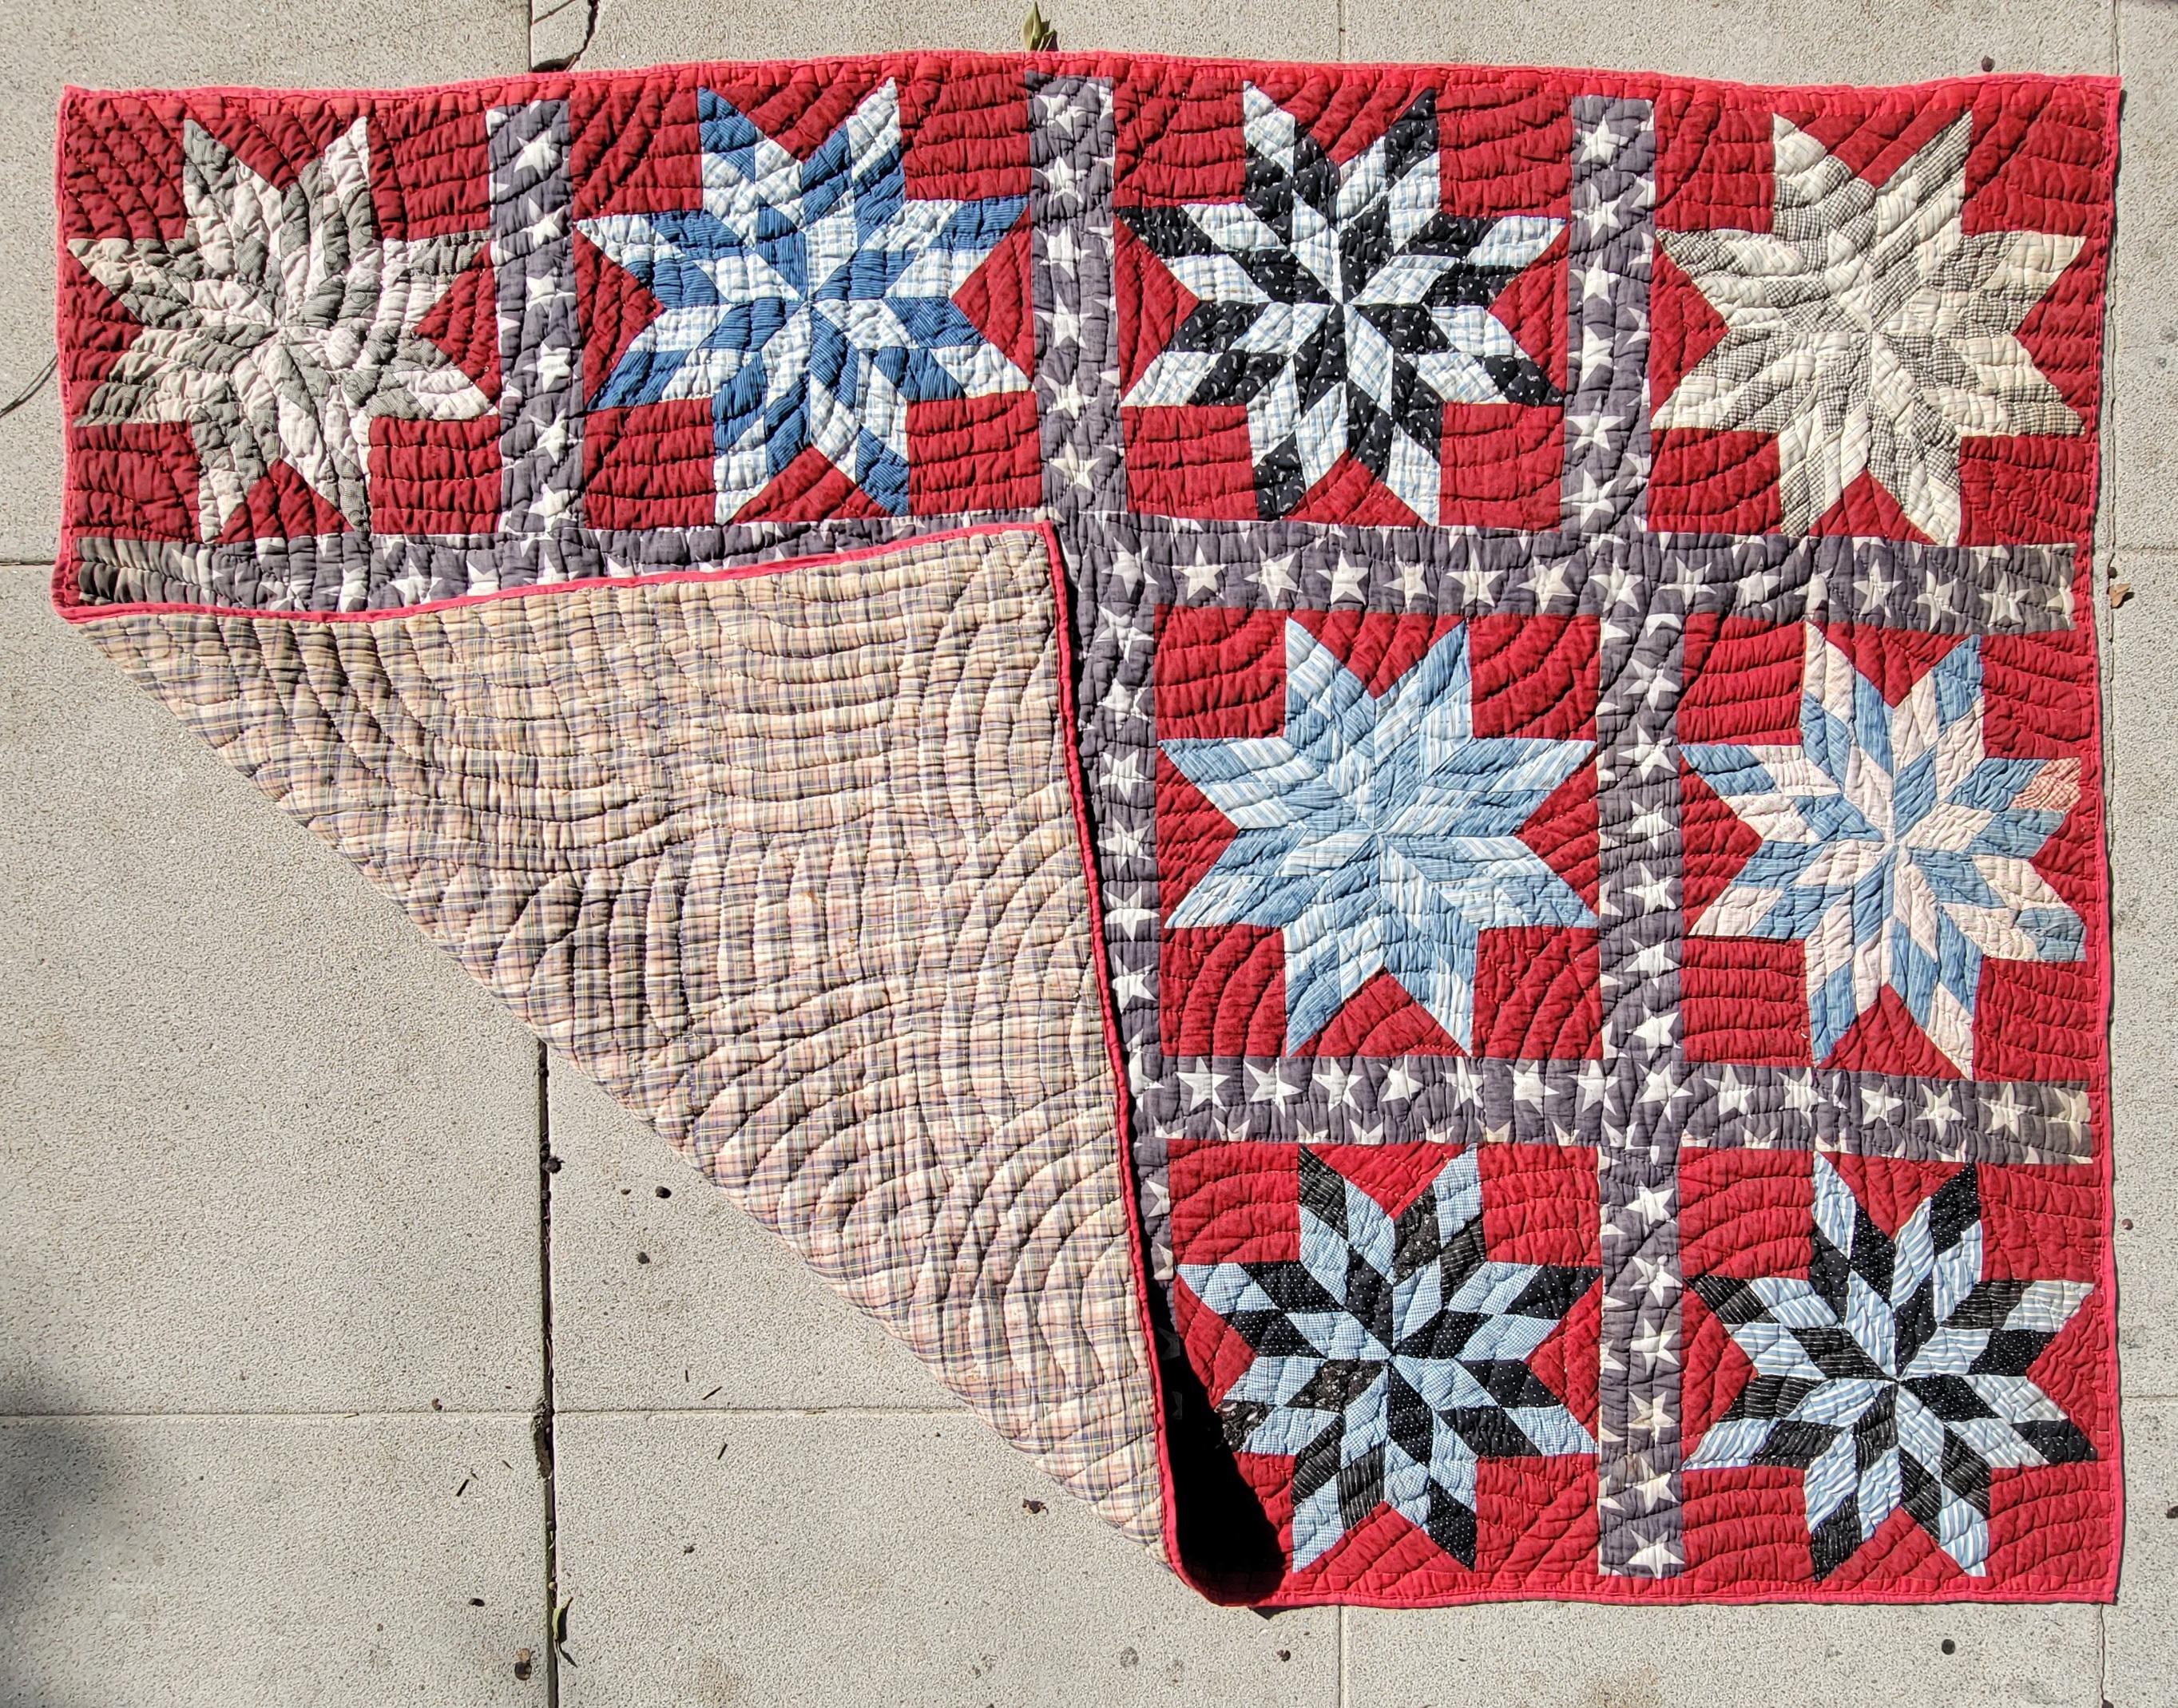 19thc contained stars Flag bunting cotton sashing. The backing is in a brown homespun linen. Quilt from Alabama Circa 1870. Possibly Afro-American.